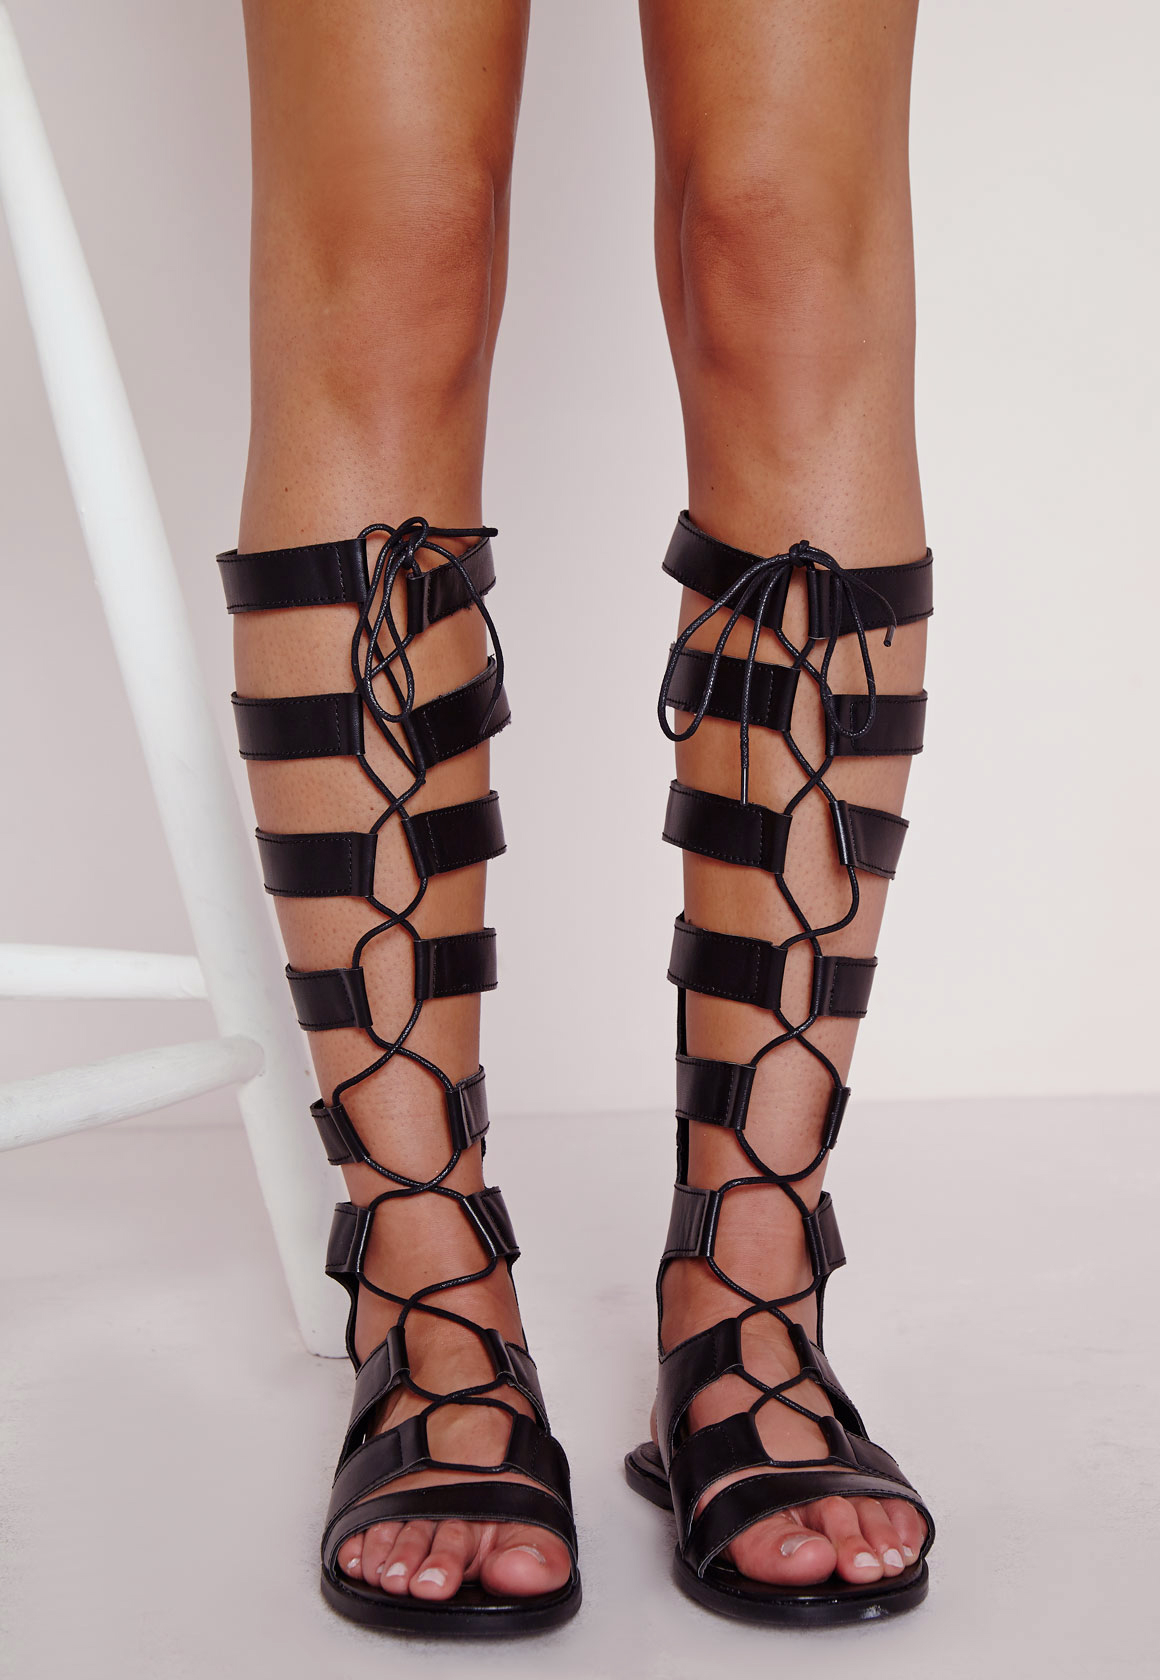 Lyst Missguided Lace Up Knee High Flat Gladiator Sandals Black in Black